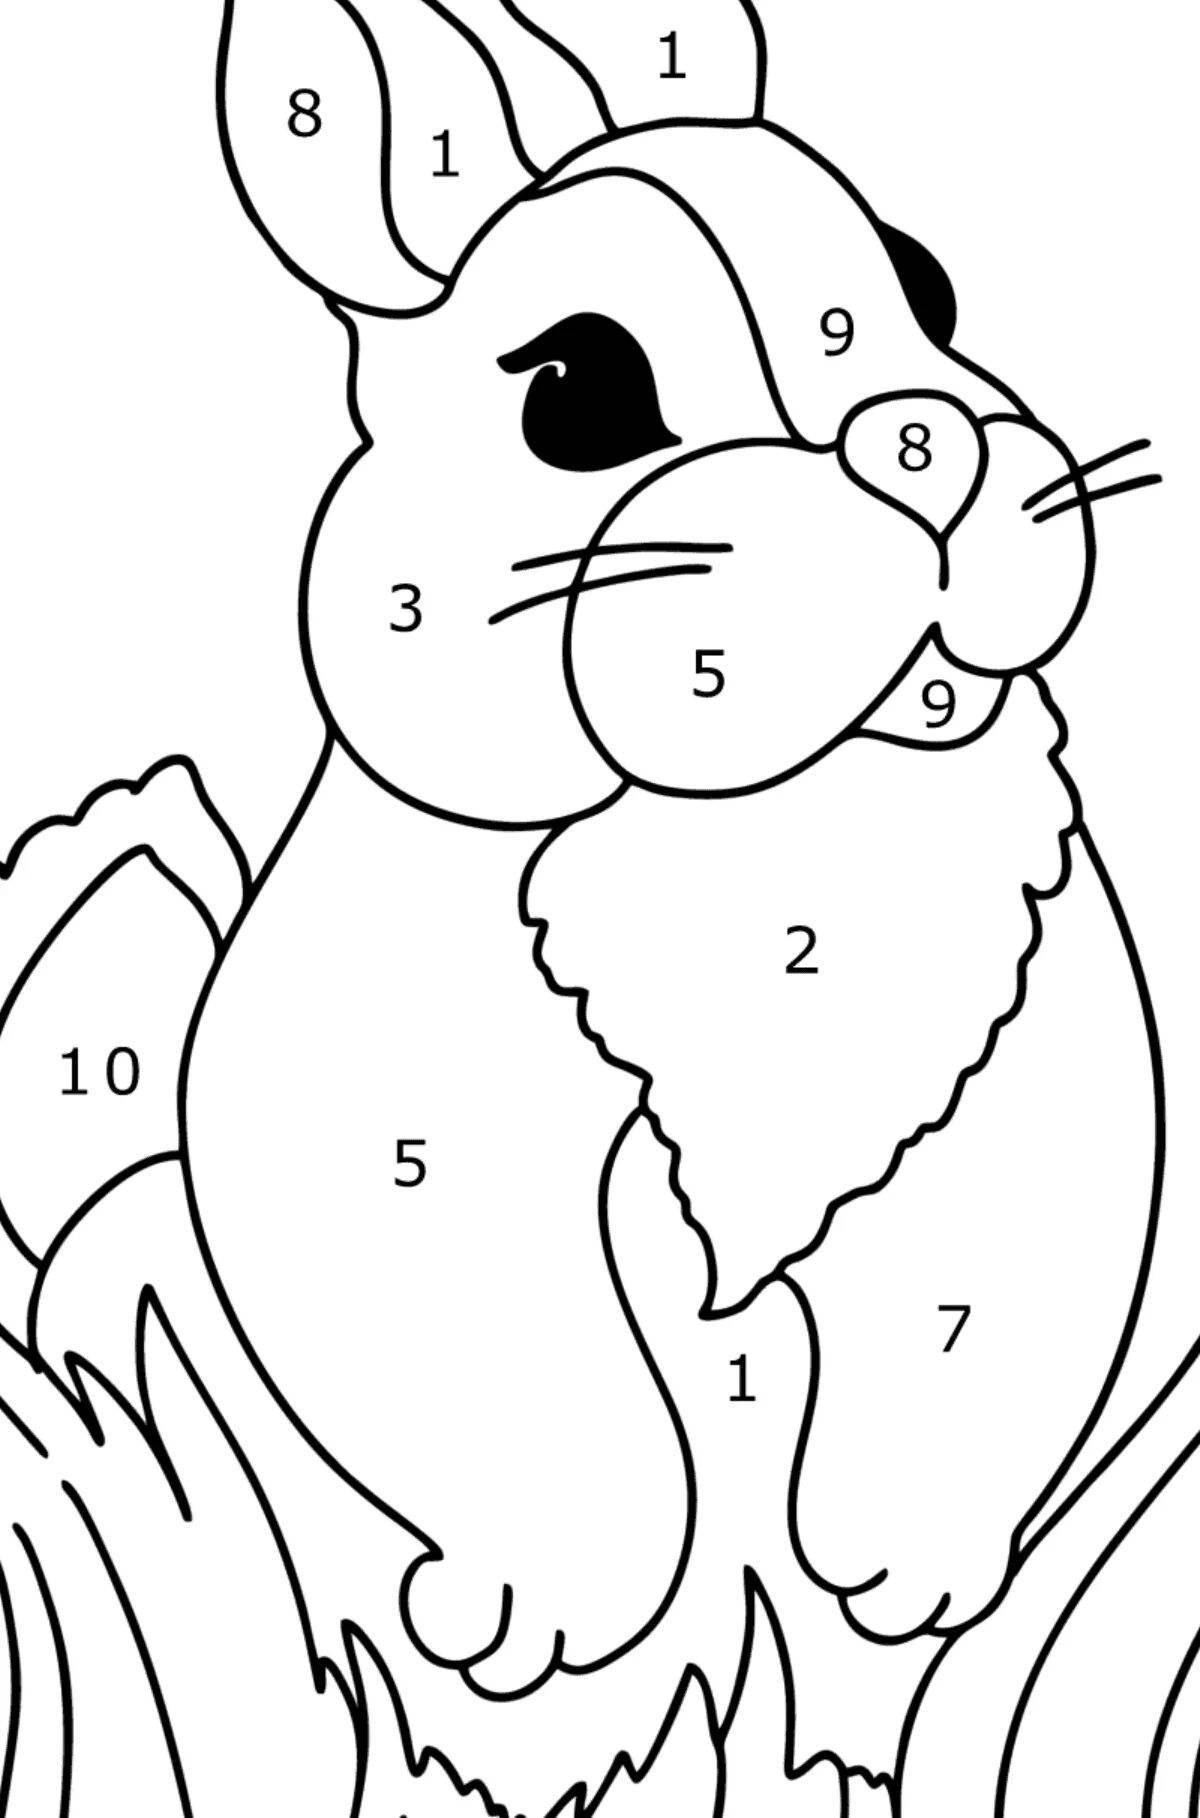 Coloring book intriguing hare by numbers